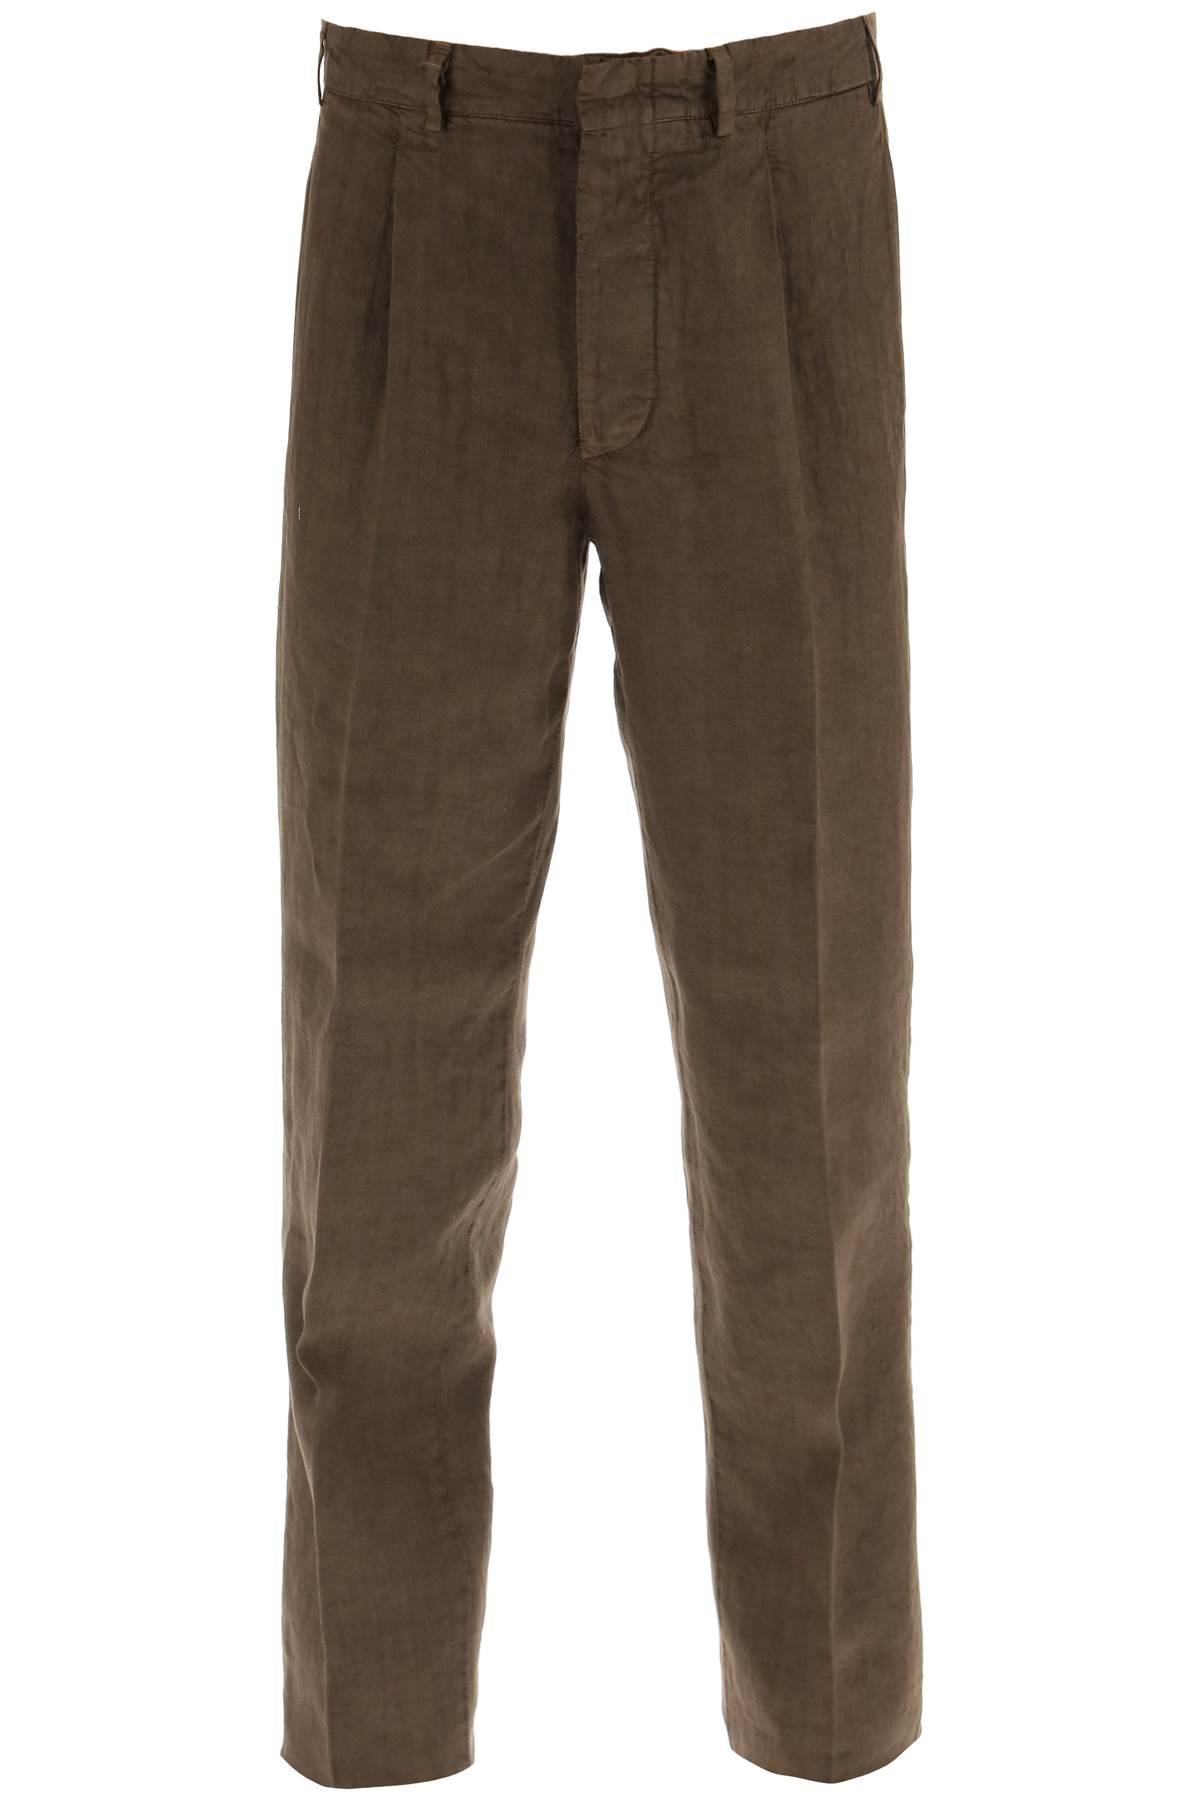 The Gigi Linen Tonga Trousers in Natural for Men Slacks and Chinos Mens Trousers Slacks and Chinos The Gigi Trousers 